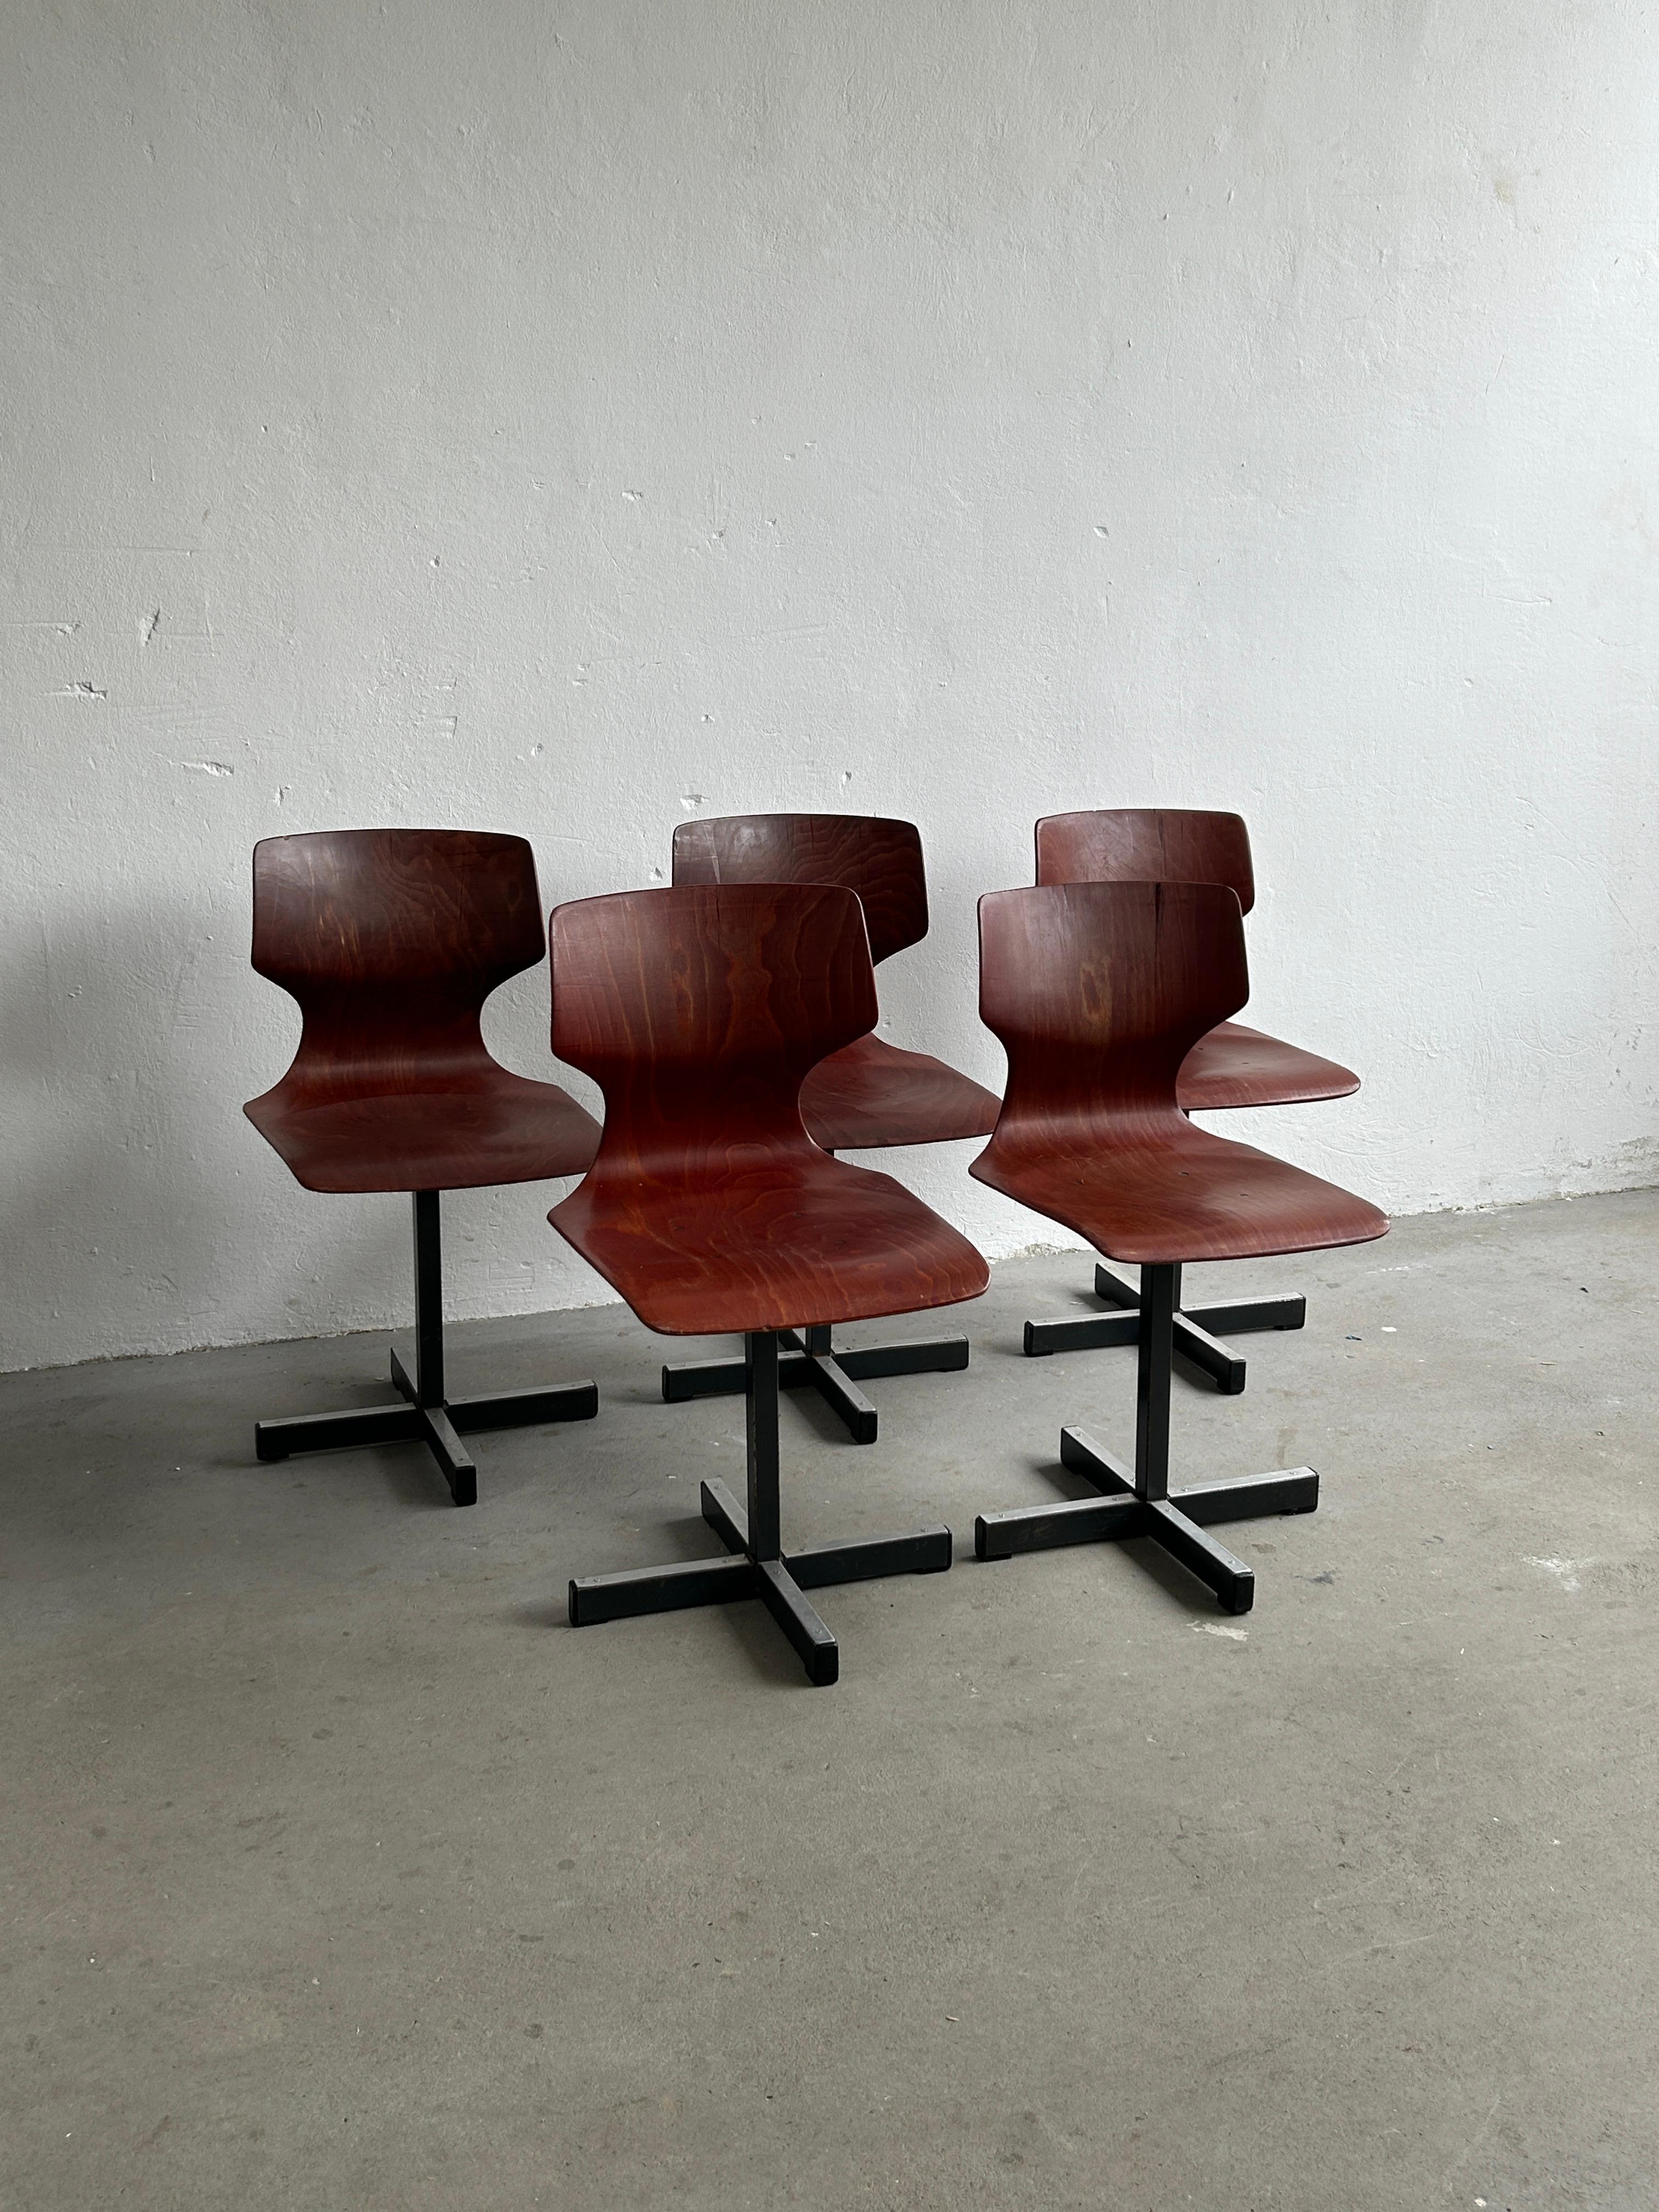 Original chair classics from the 70s made by the traditional German company Flötotto. 
This model was developed and produced by the family in the post-war period. It revolutionized furnishing furniture in schools and universities. The chair was